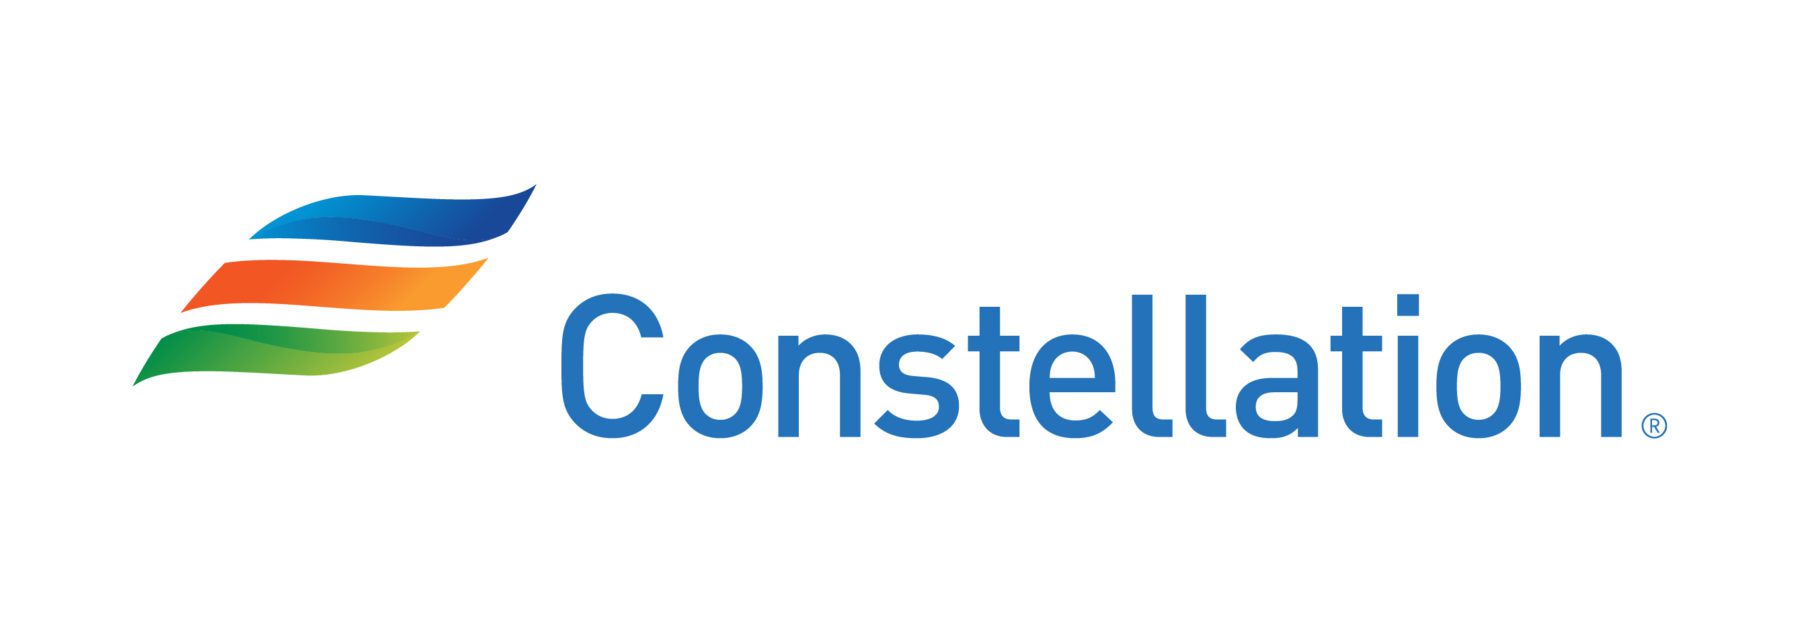 Constellation logo in partnership with Virtual Incentives